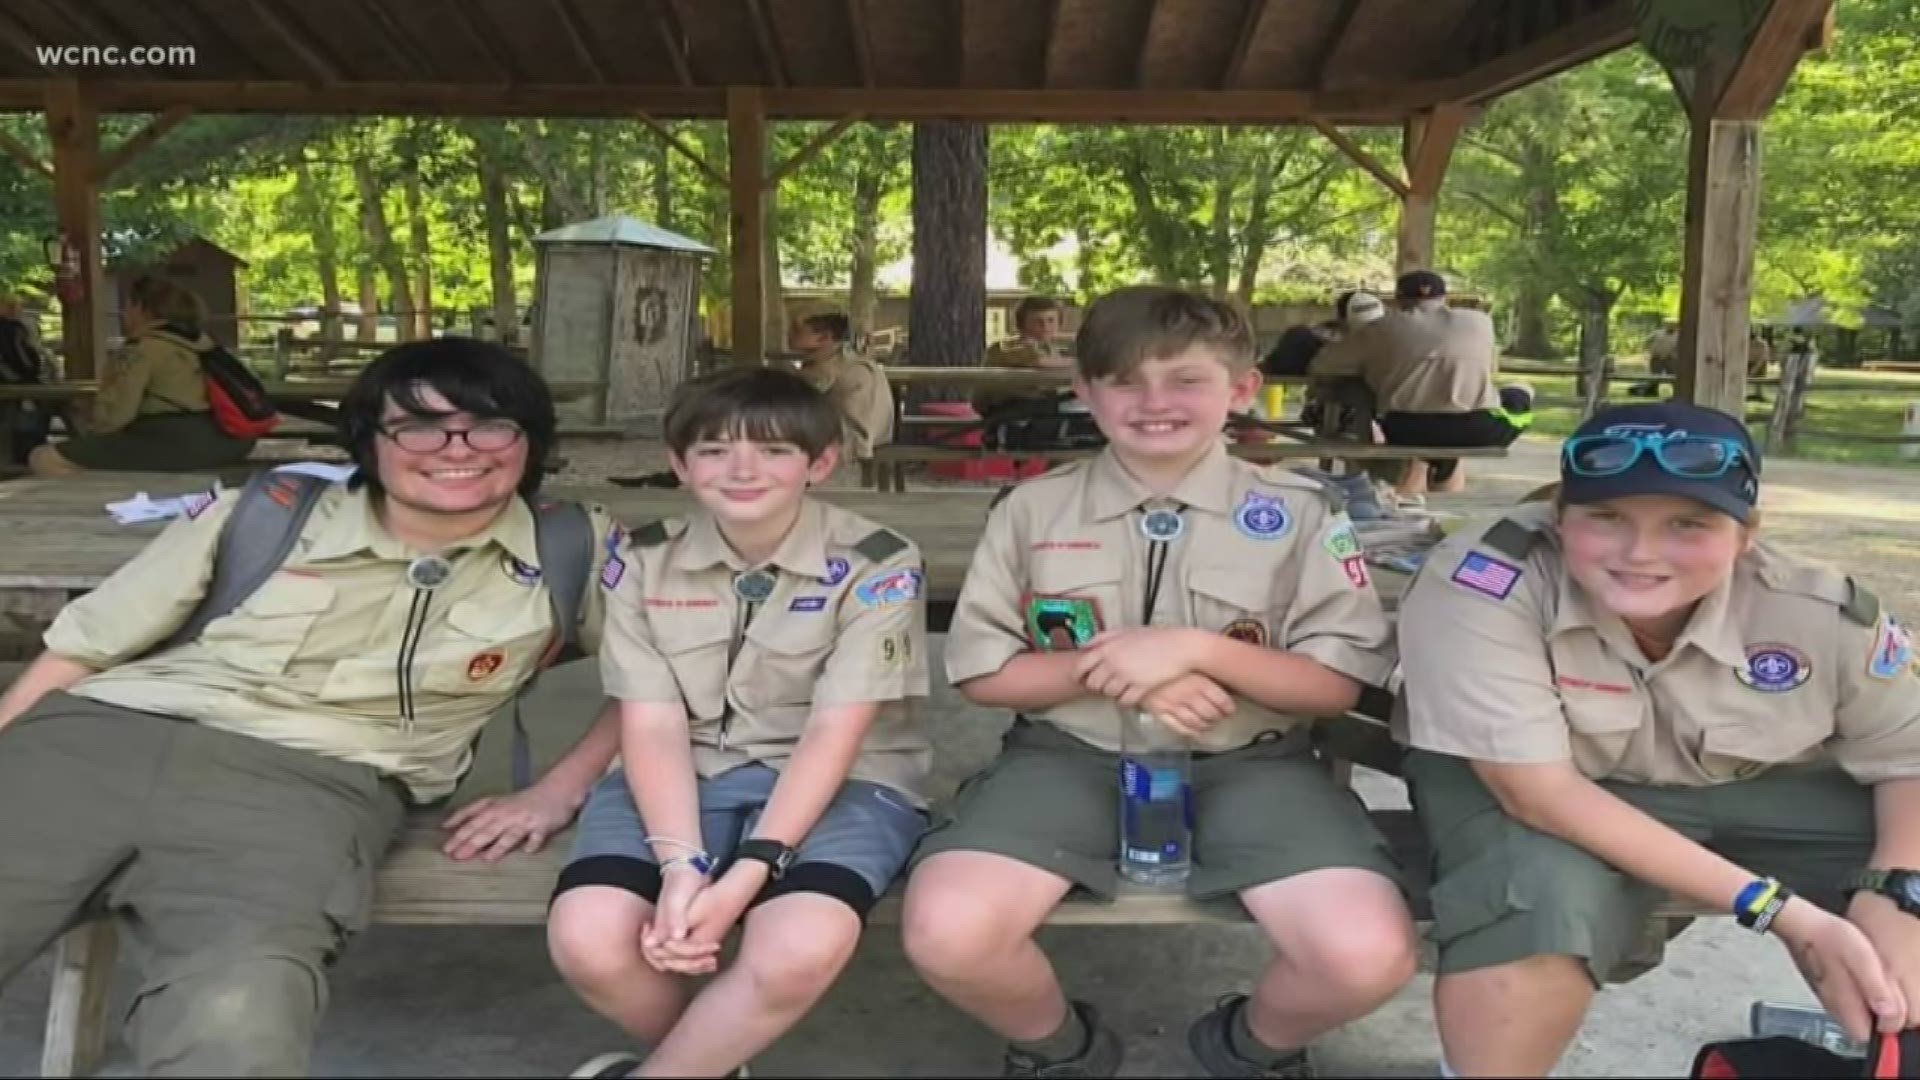 A Union County Teen with autism has received the highest achievement in the Boy Scouts -- he just earned the rank of Eagle Scout.